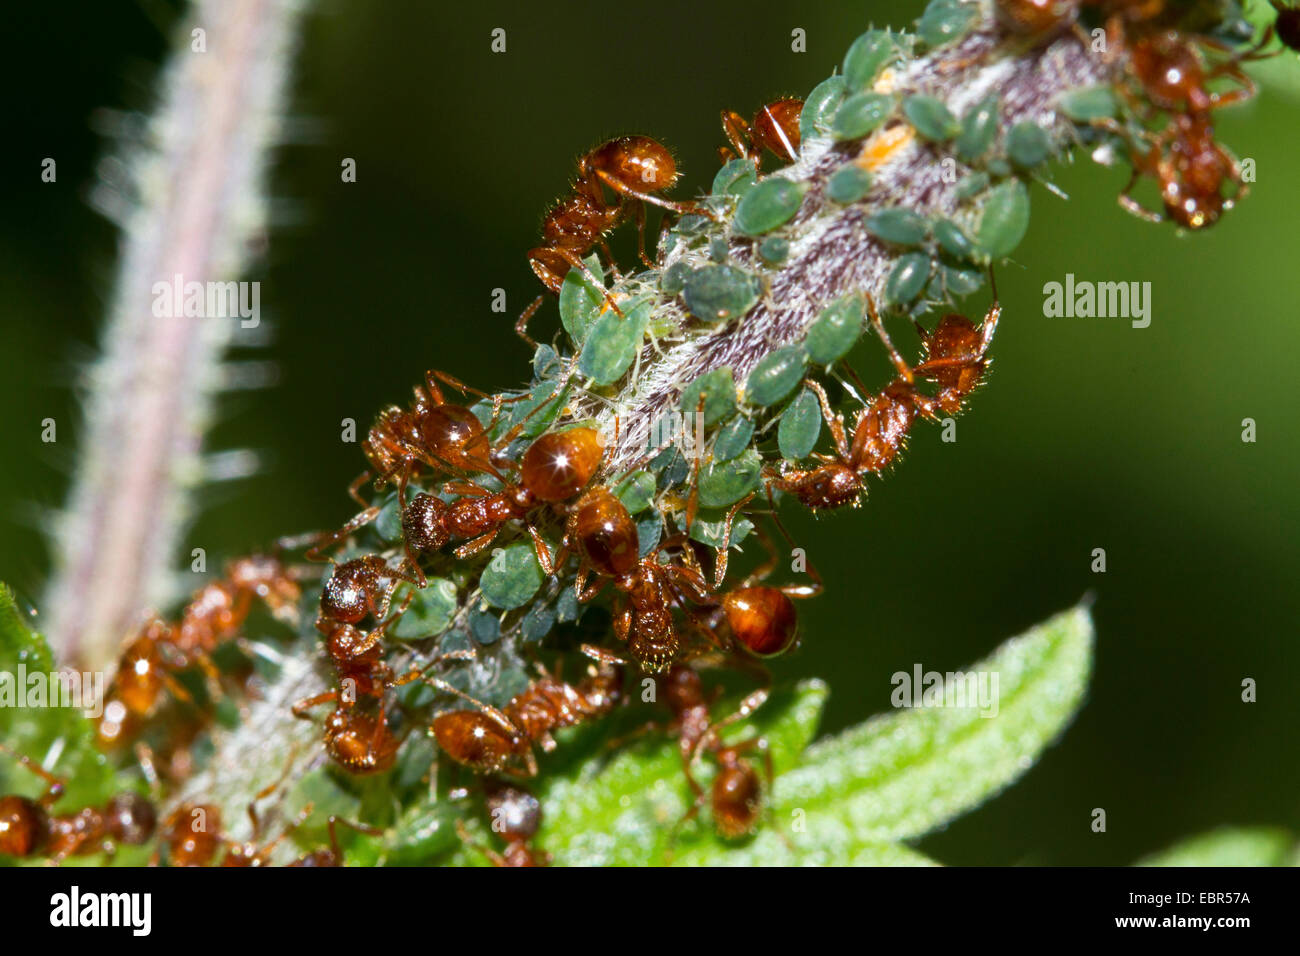 ants milking aphids, Germany Stock Photo